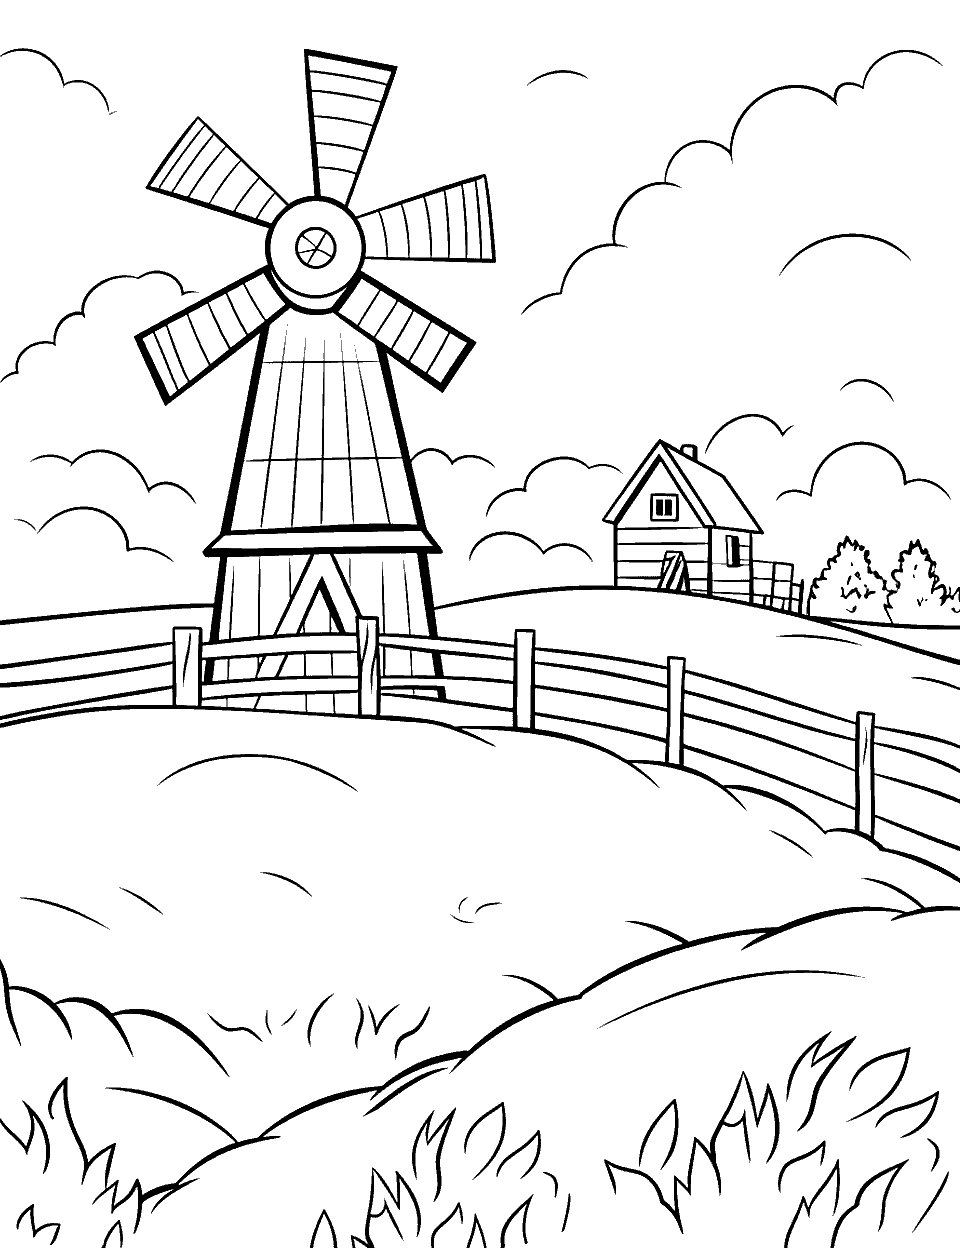 Windmill on the Farm Coloring Page - A windmill with fields in the background.